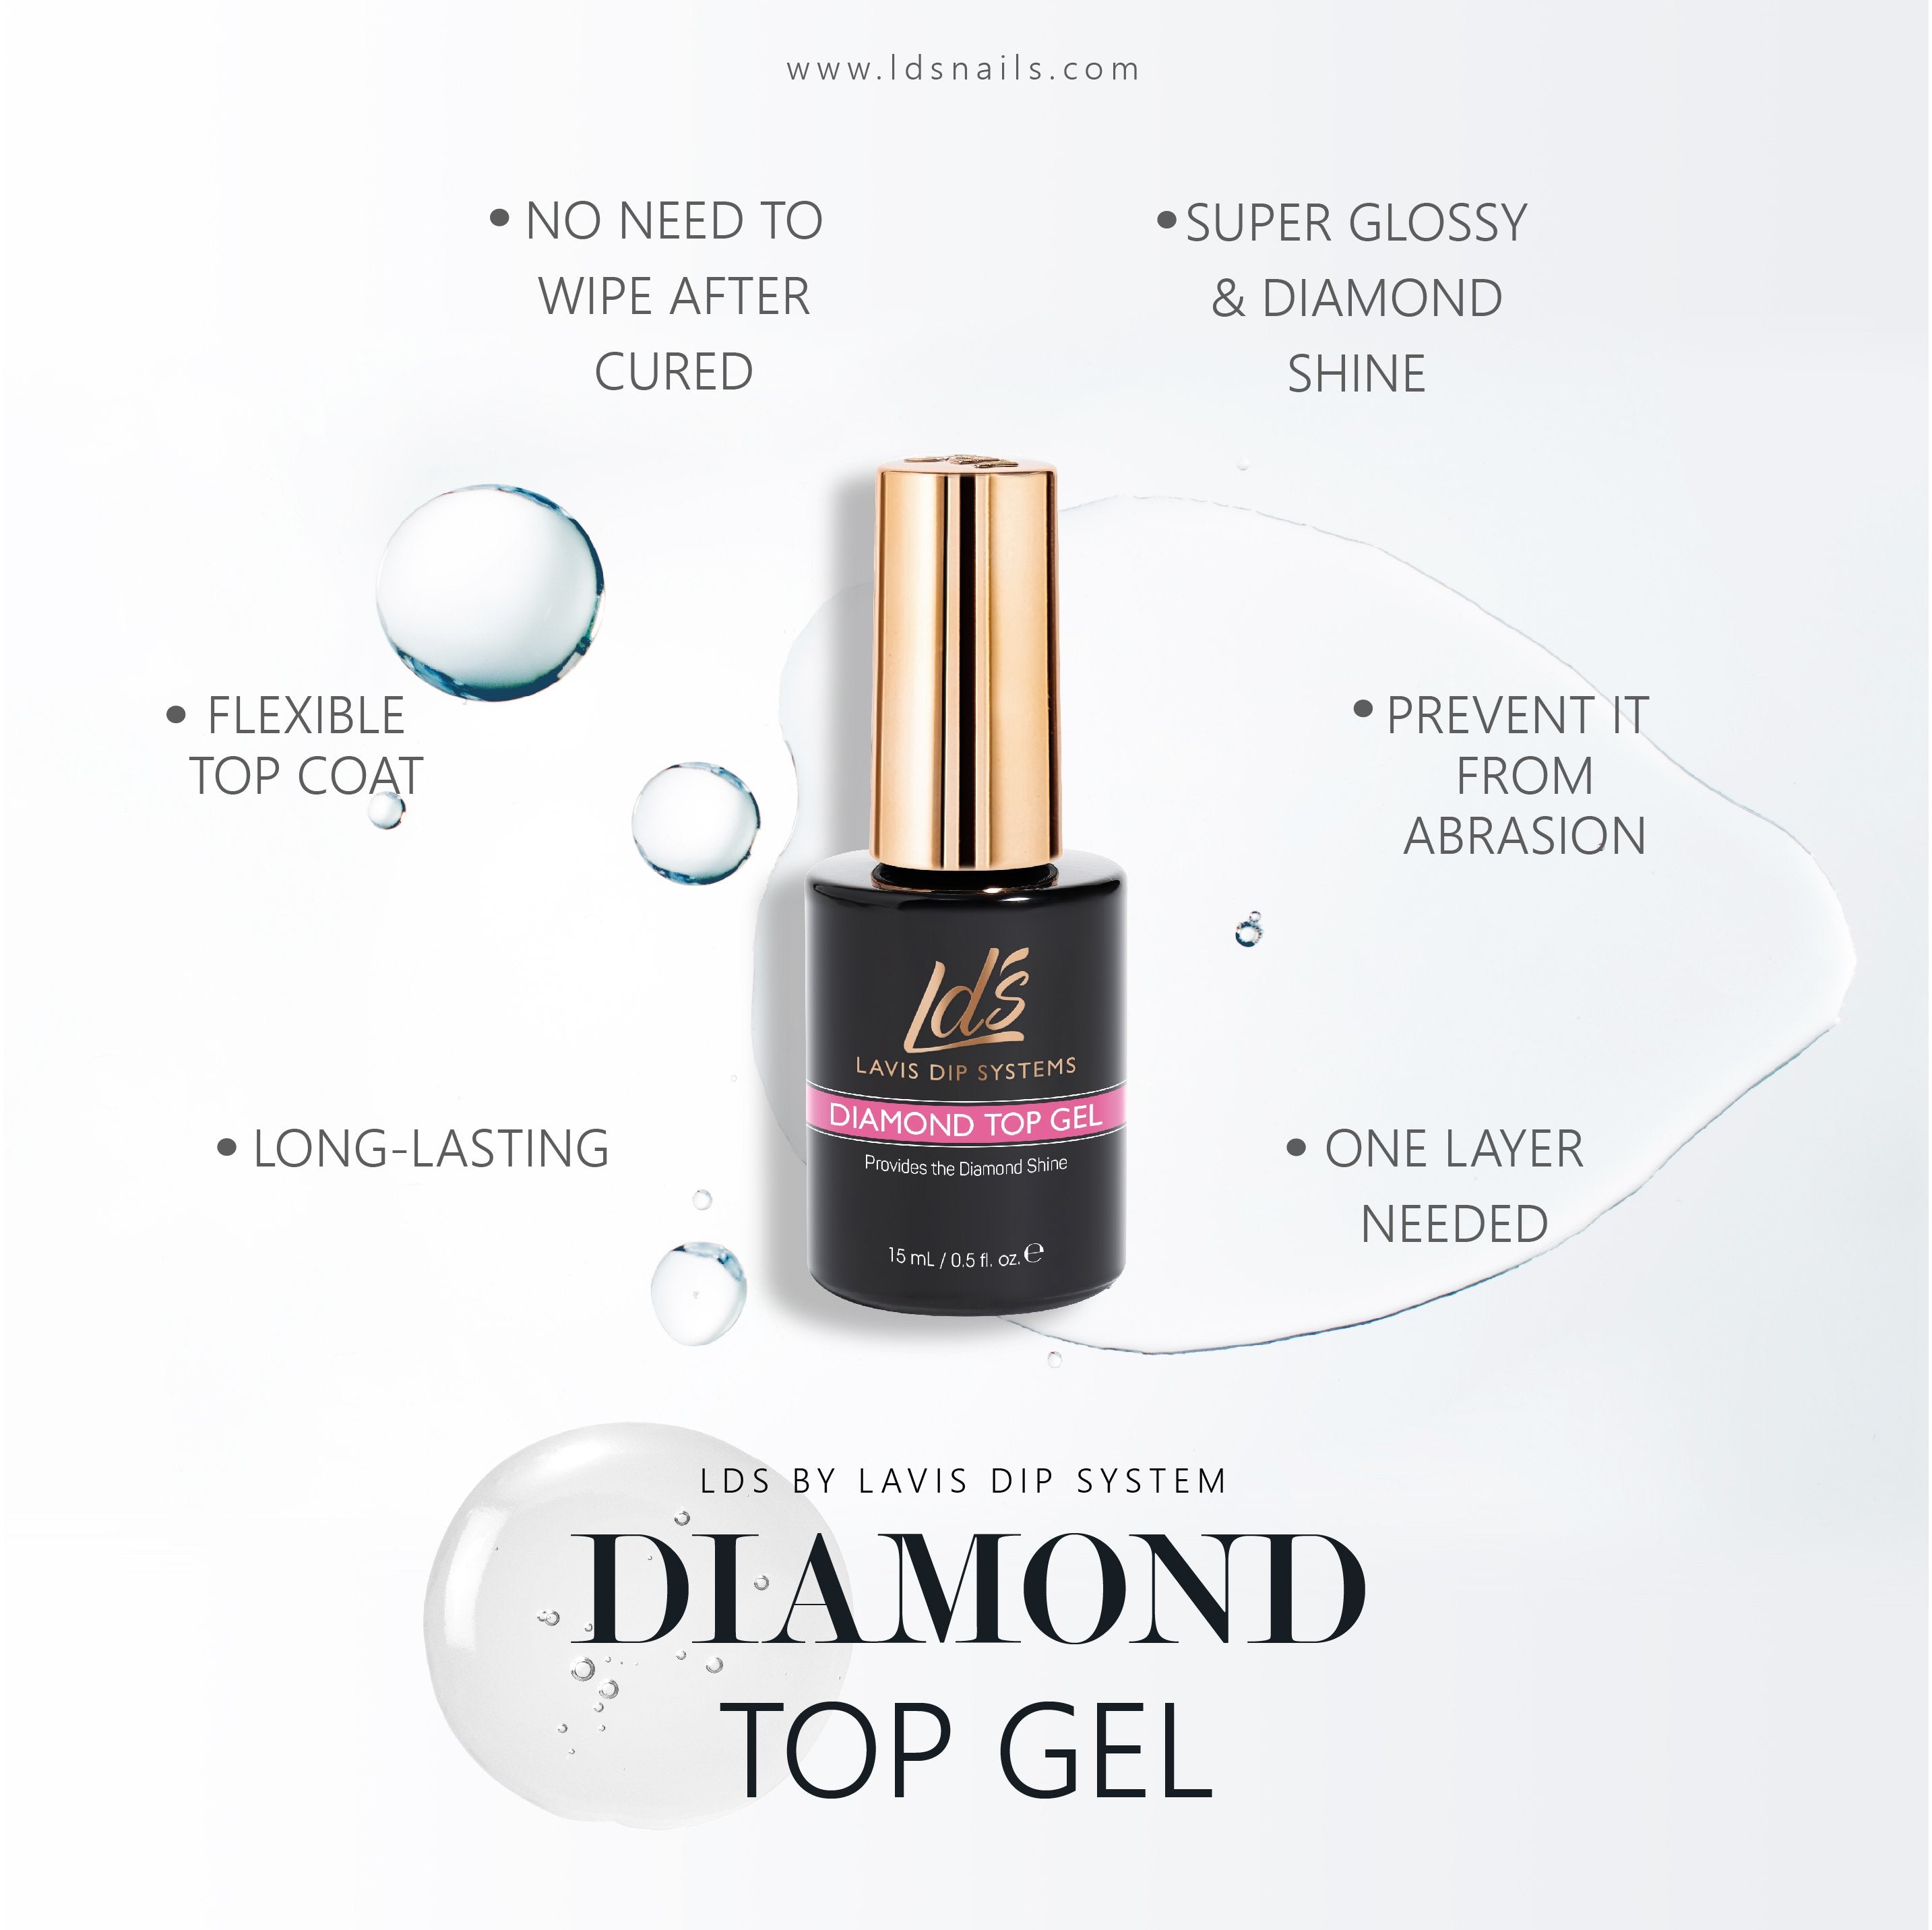 LDS Healthy Gel & Matching Lacquer Starter Kit : 19,20,21,22,23,24,Base,Top & Strengthener